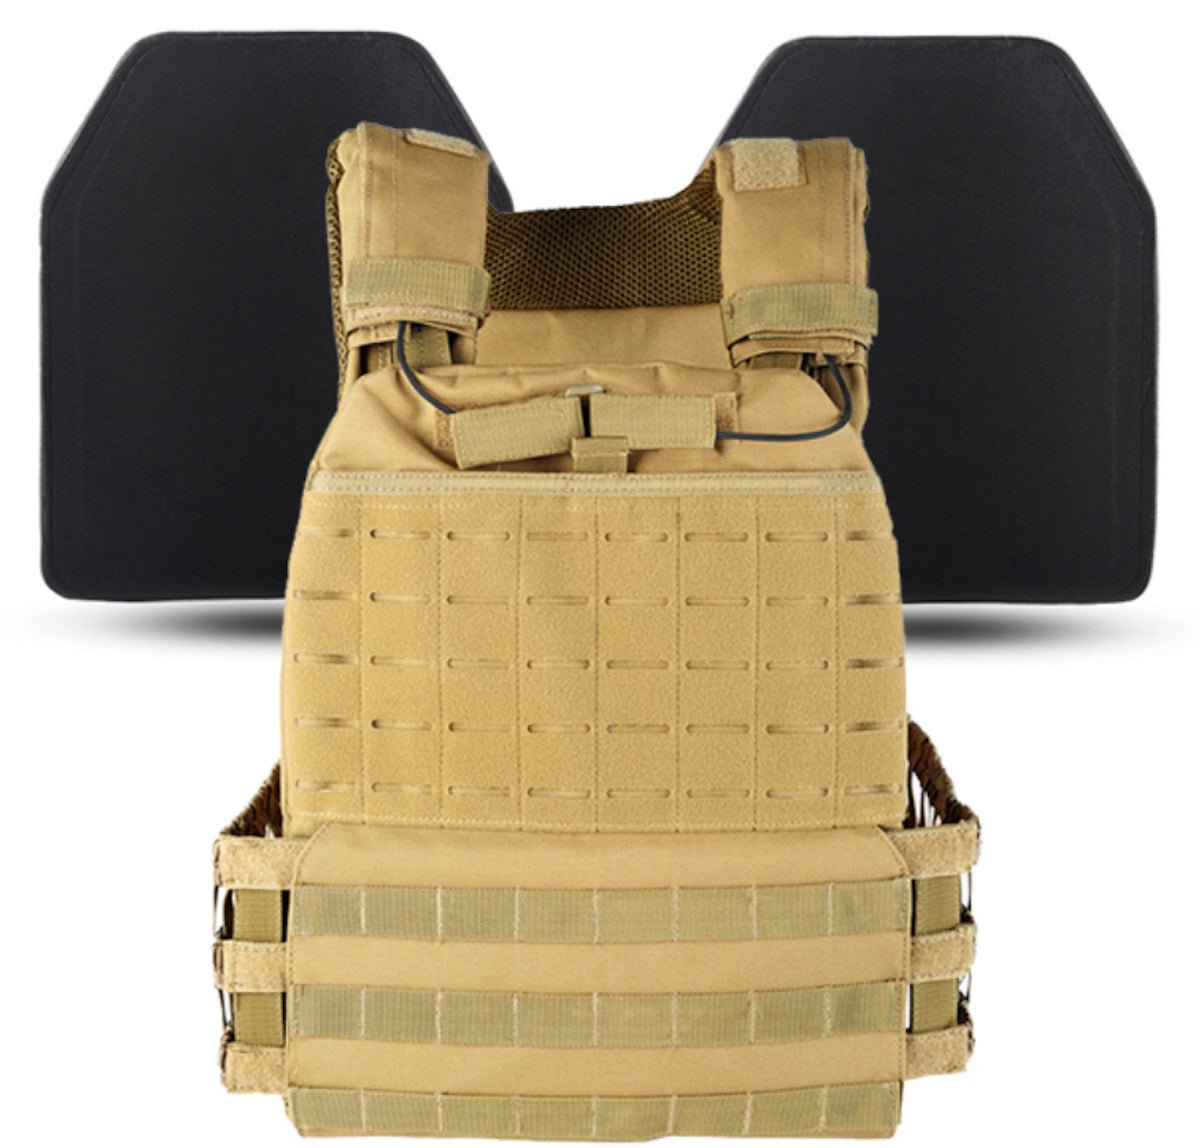 Pros and Cons of Tactical Weight Vests and Weight Vest Plates